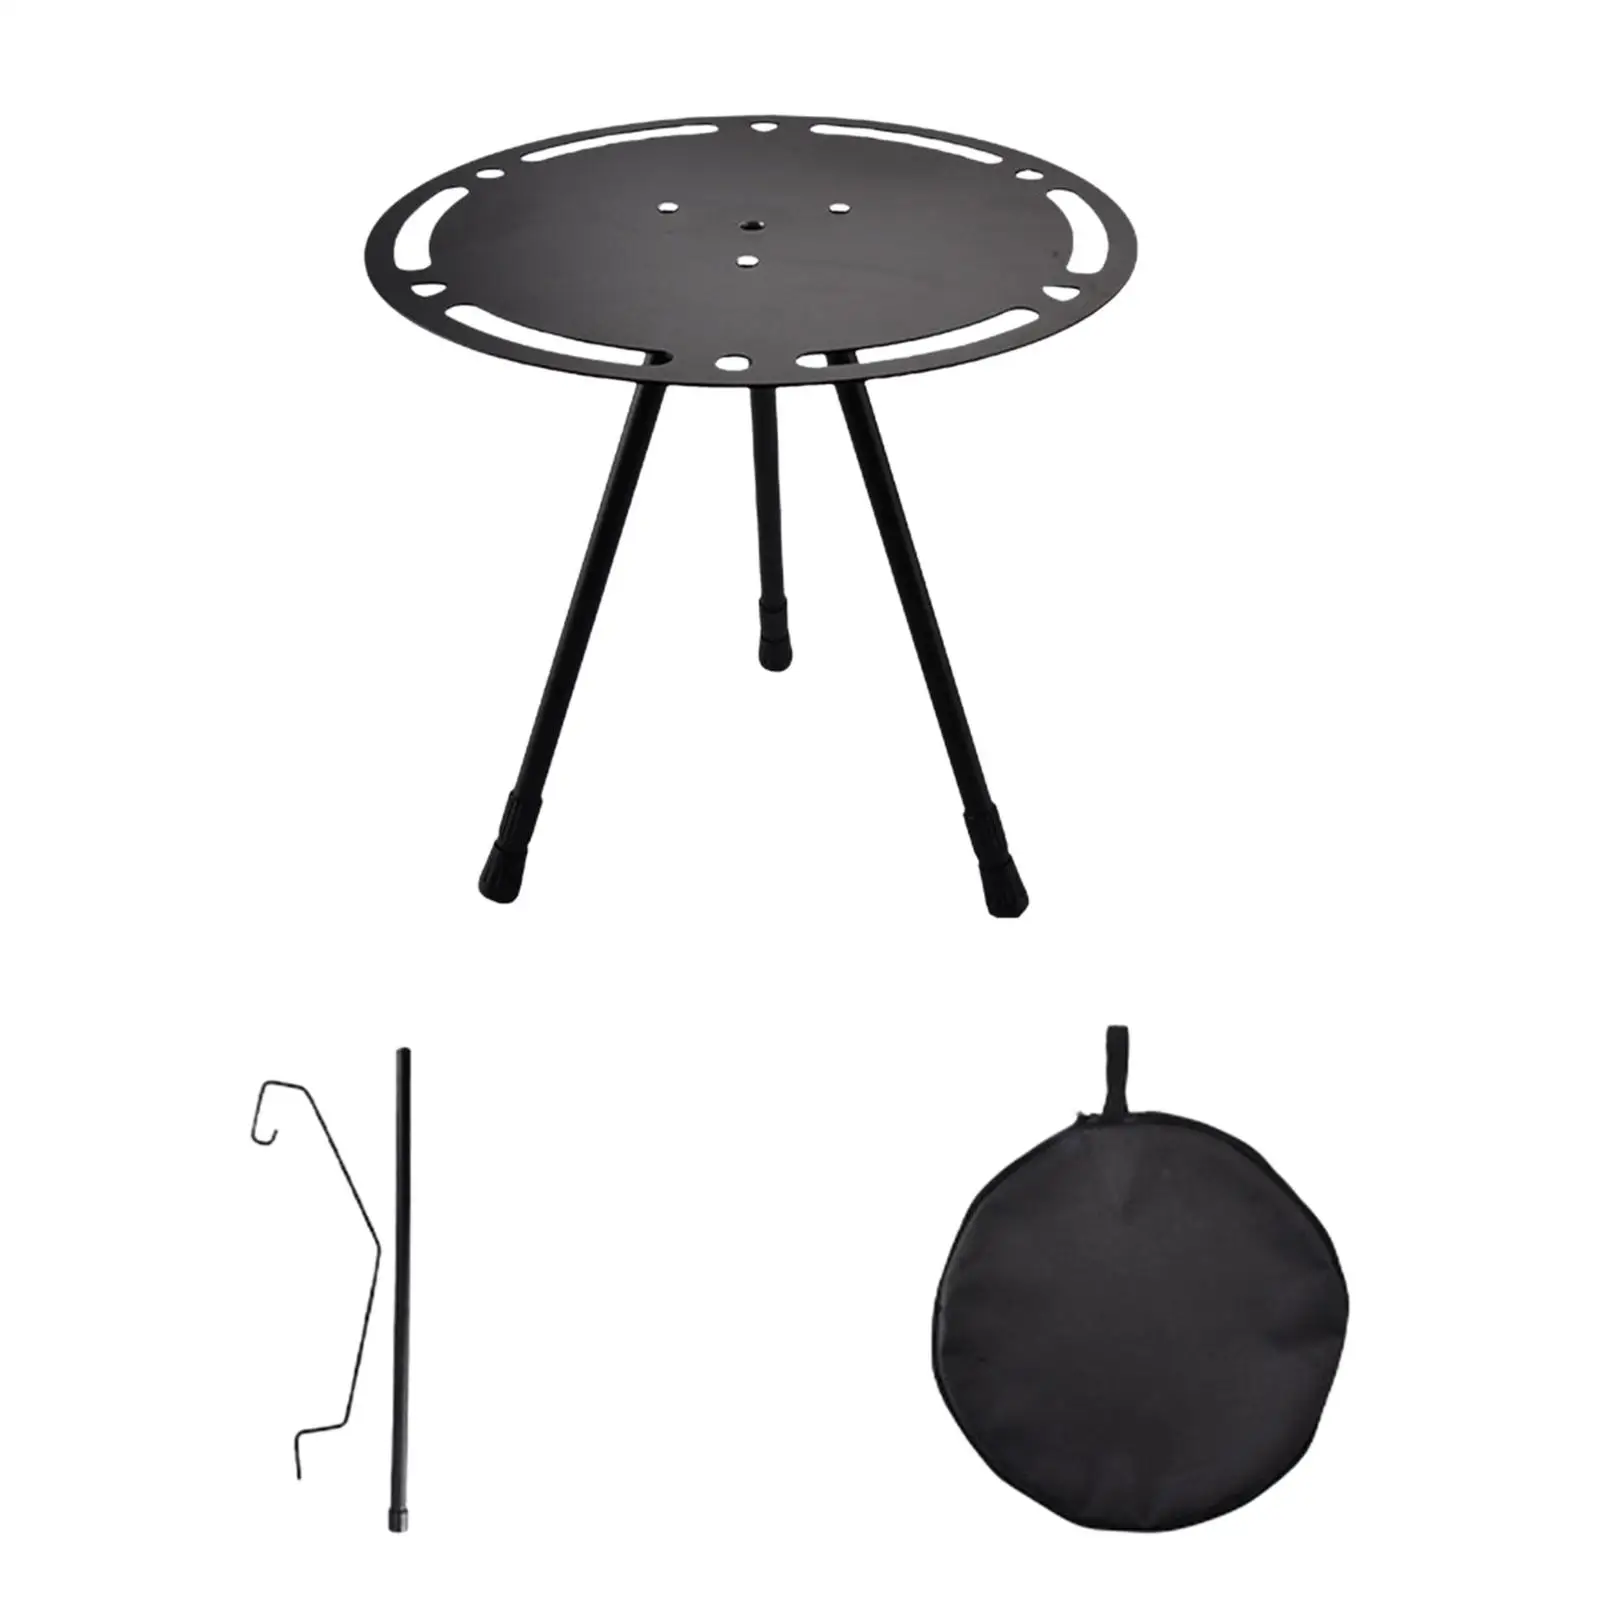 Portable Table Foldable Small Round Table with Lantern Holder Camping Side Table for Picnic Patio Outdoor Equipment